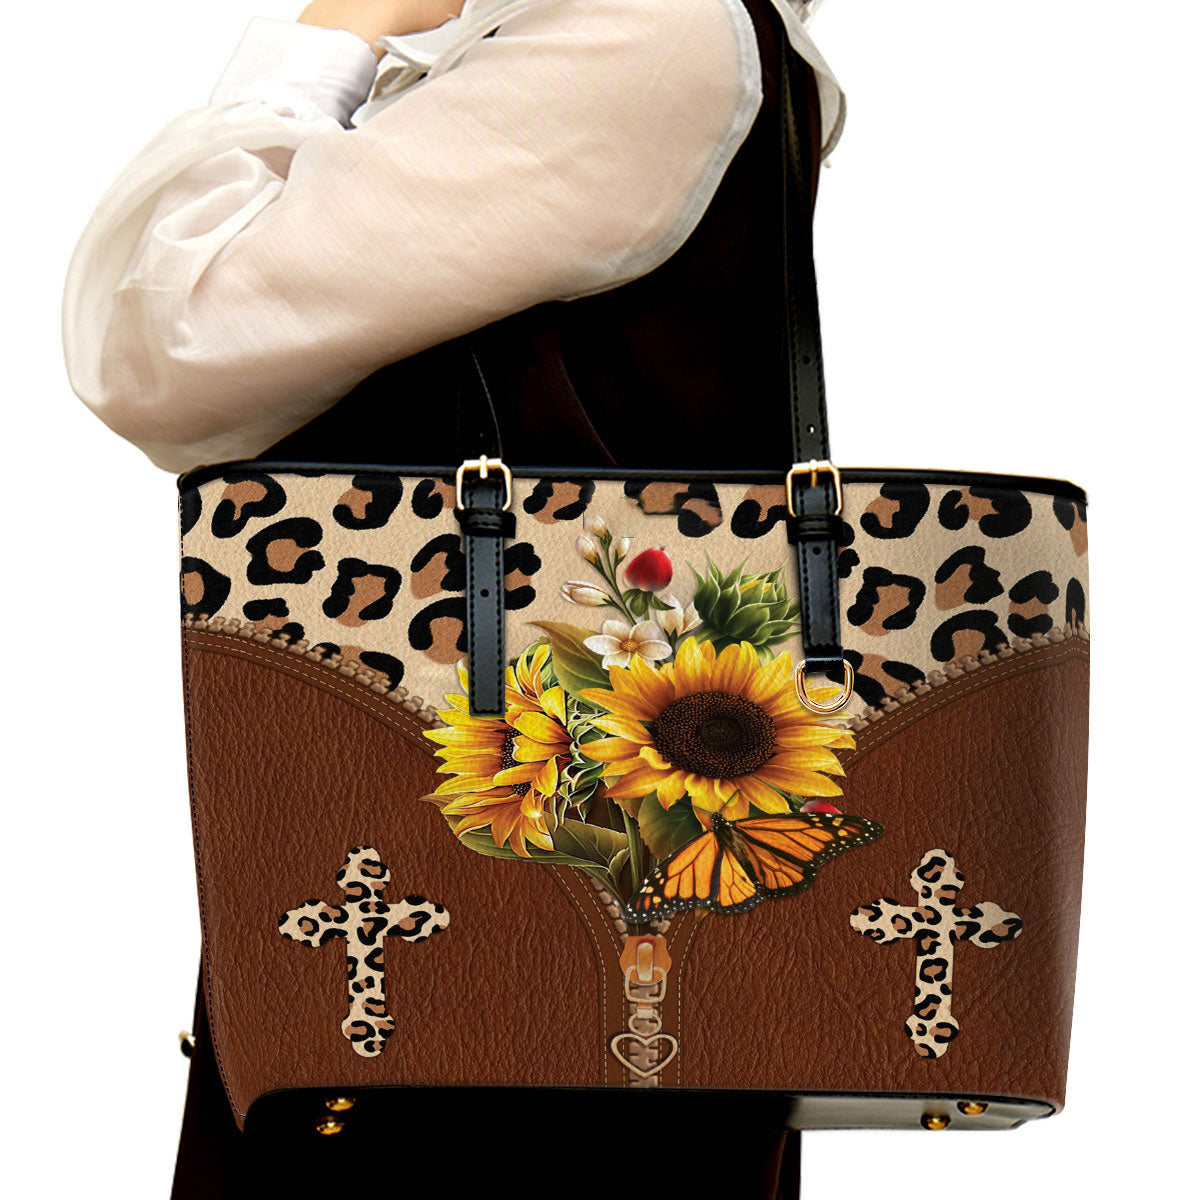 Sunflower Large Leather Tote Bag - Christ Gifts For Religious Women - Best Mother's Day Gifts